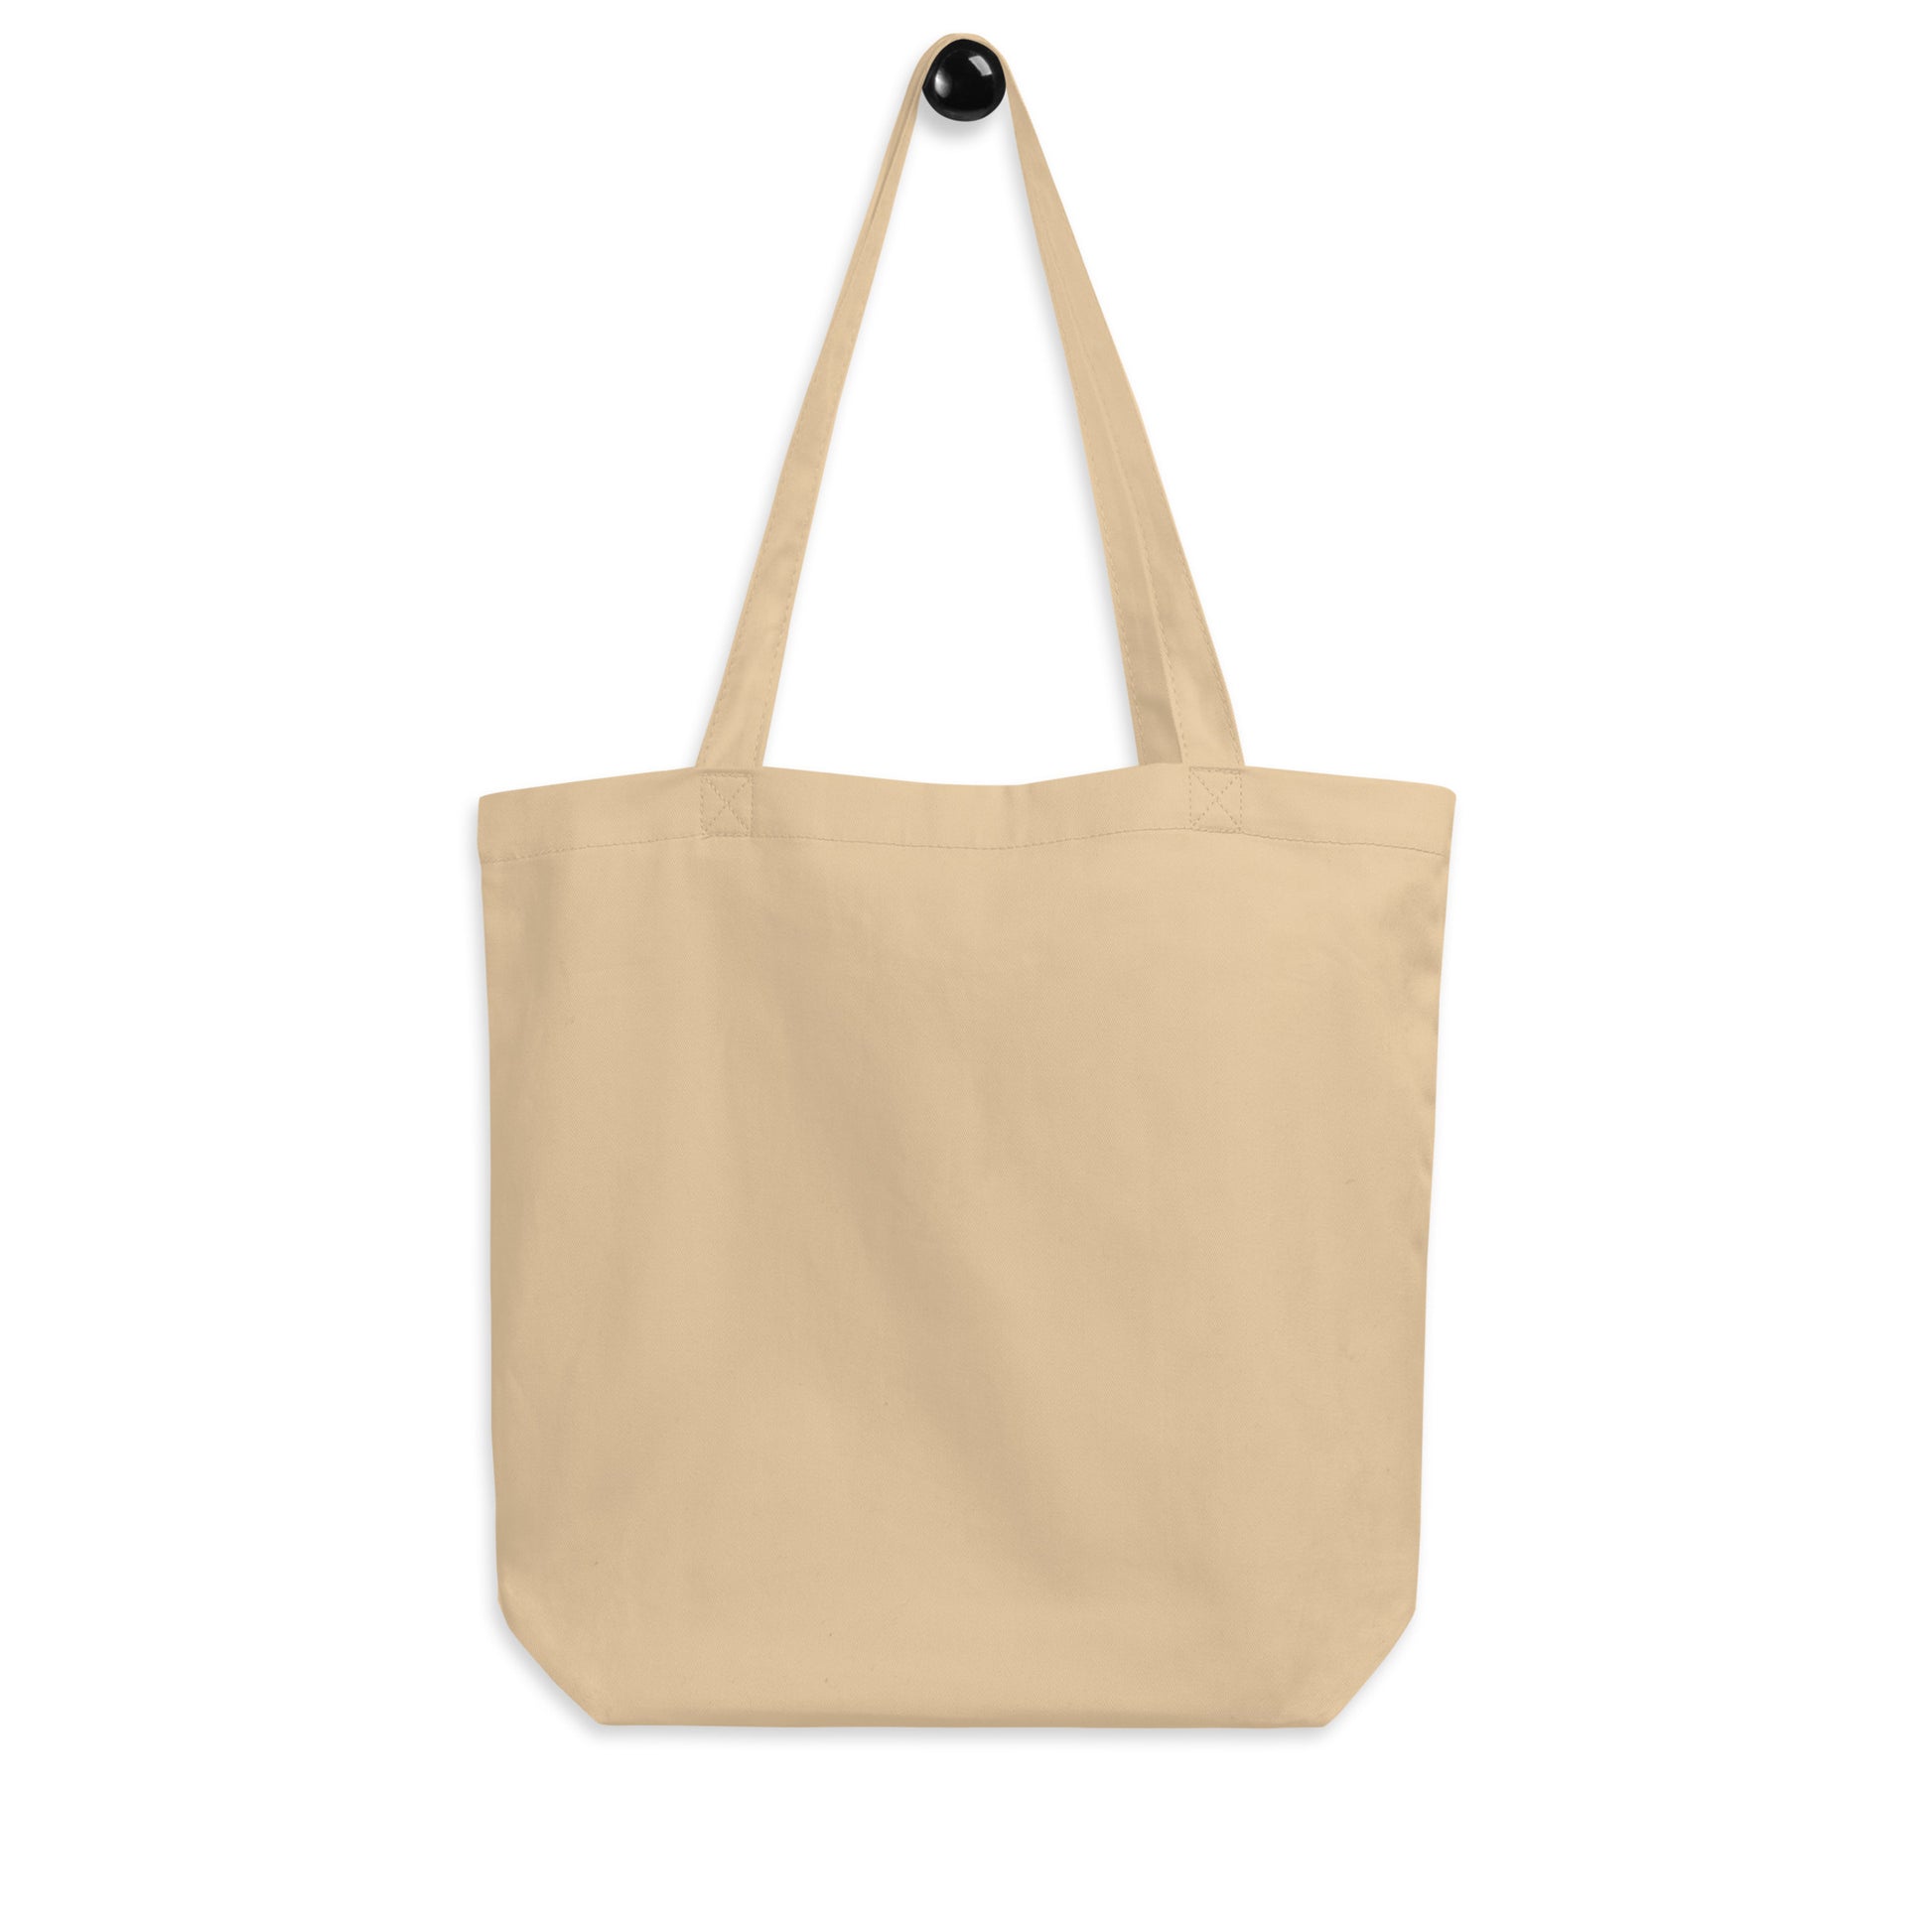 Aviation Gift Organic Tote - Black • FLL Fort Lauderdale • YHM Designs - Image 05